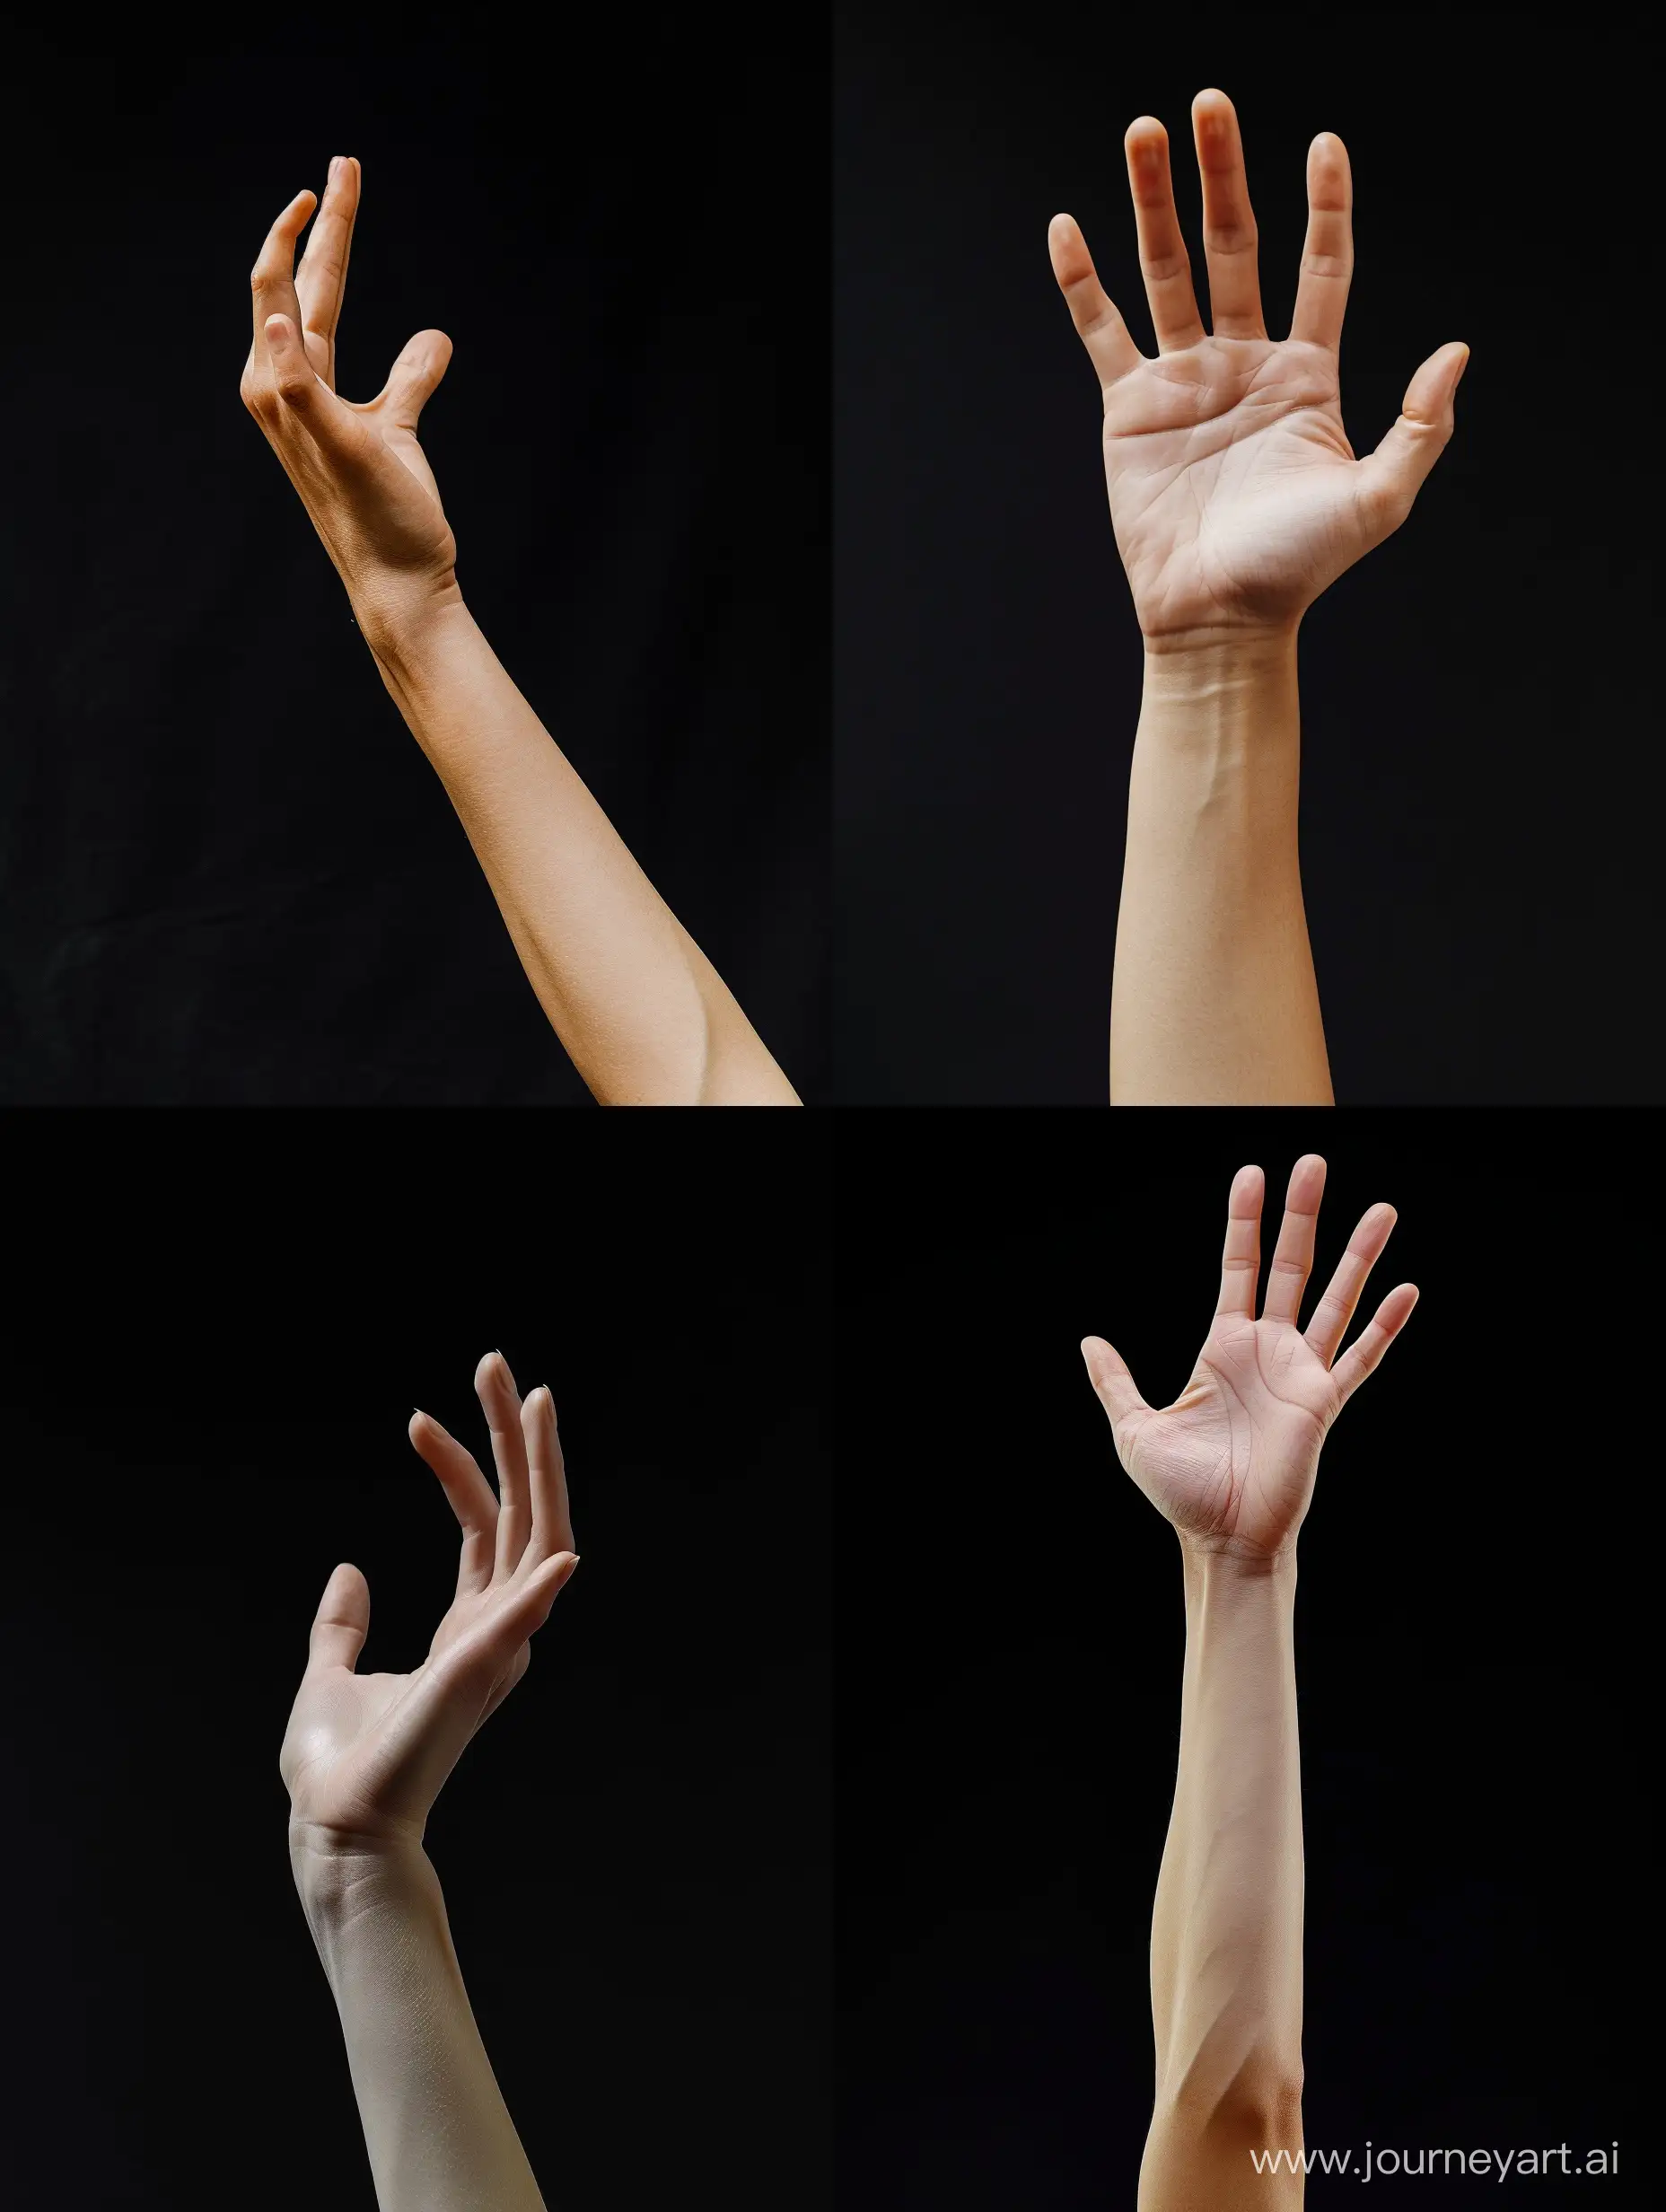 Realistic-Caucasian-Left-Hand-with-Elongated-Fingers-on-Black-Background